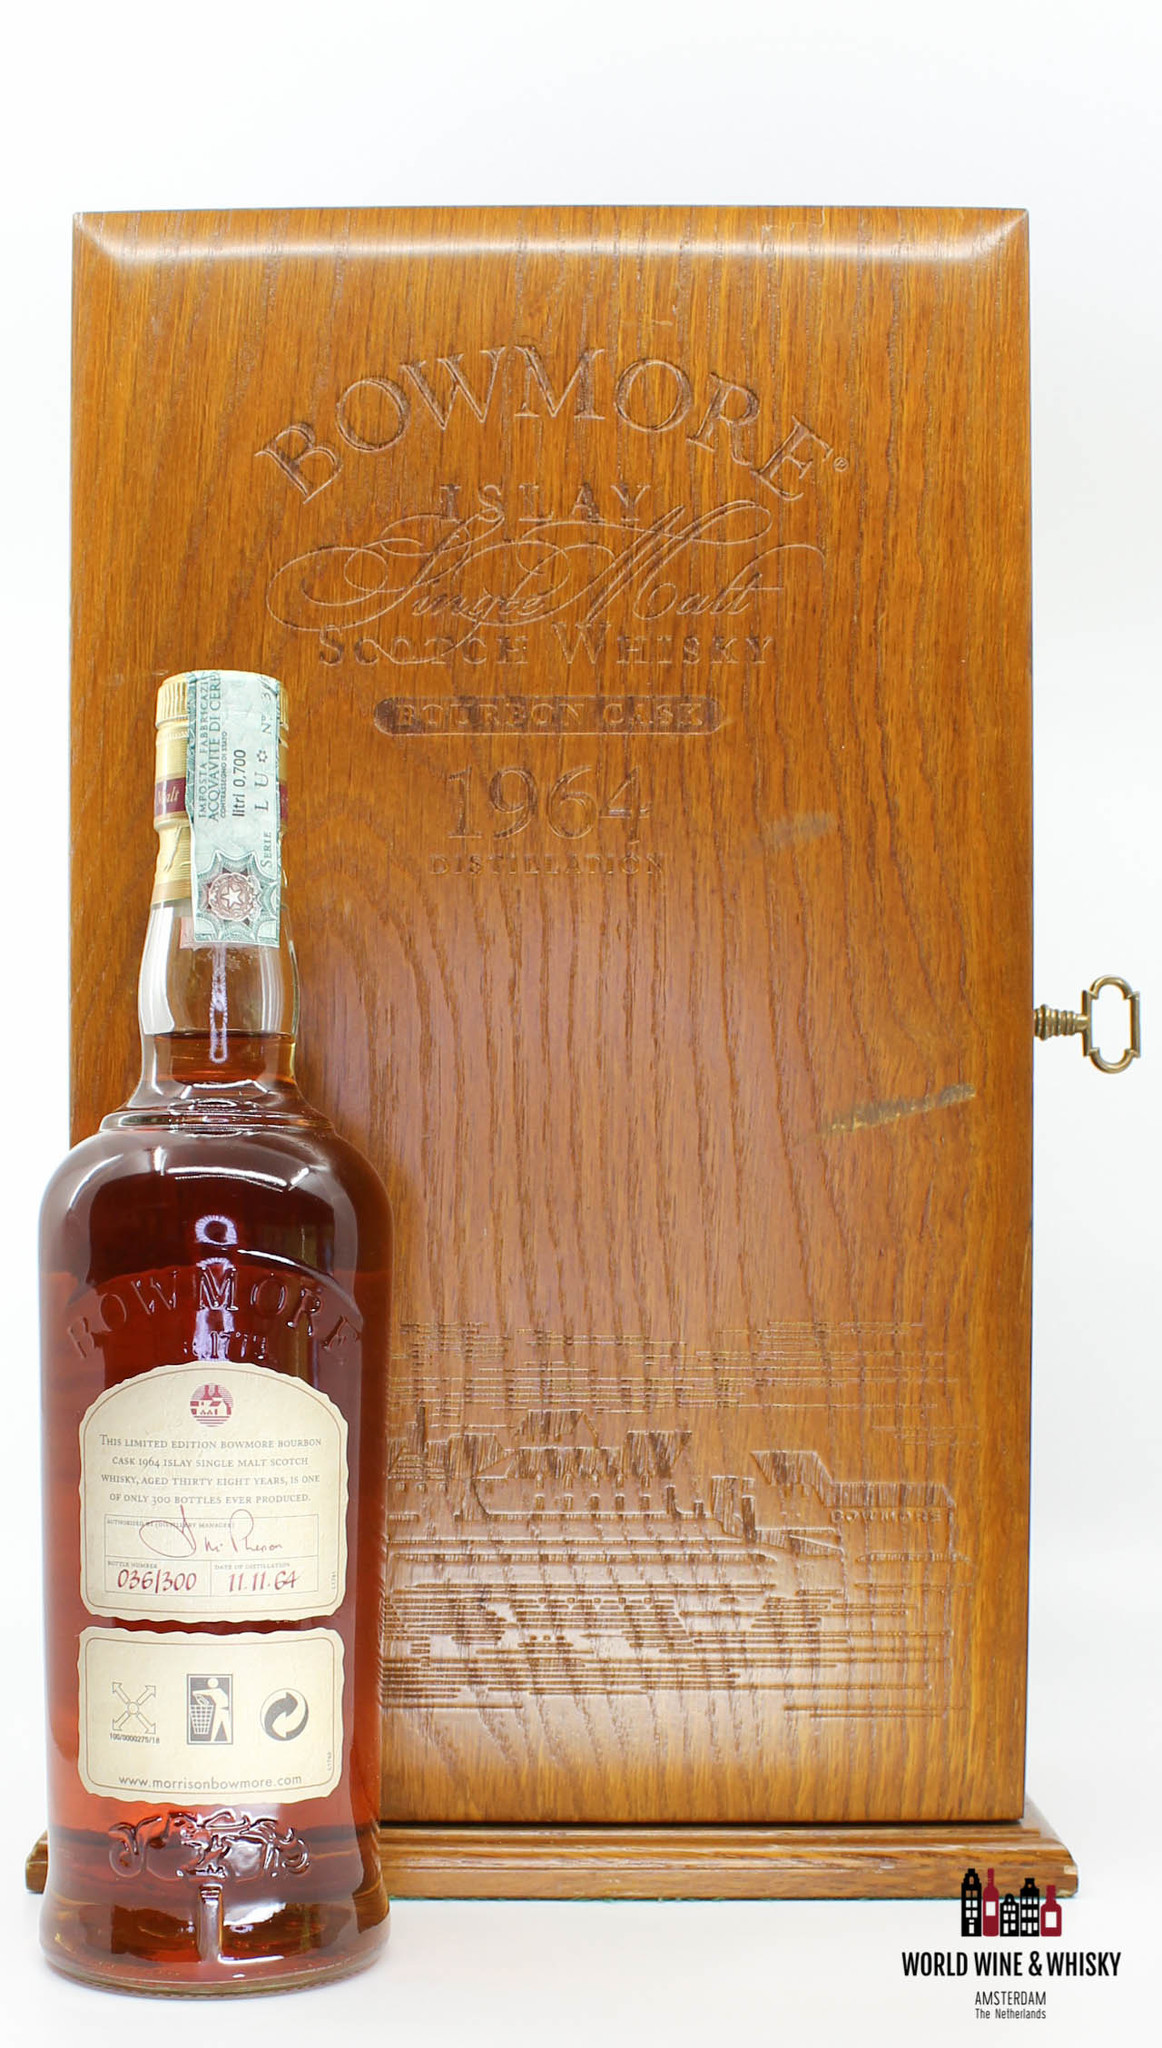 Bowmore Bowmore 38 Years Old 1964 2003 Bourbon Cask - The Trilogy Series 43.2%